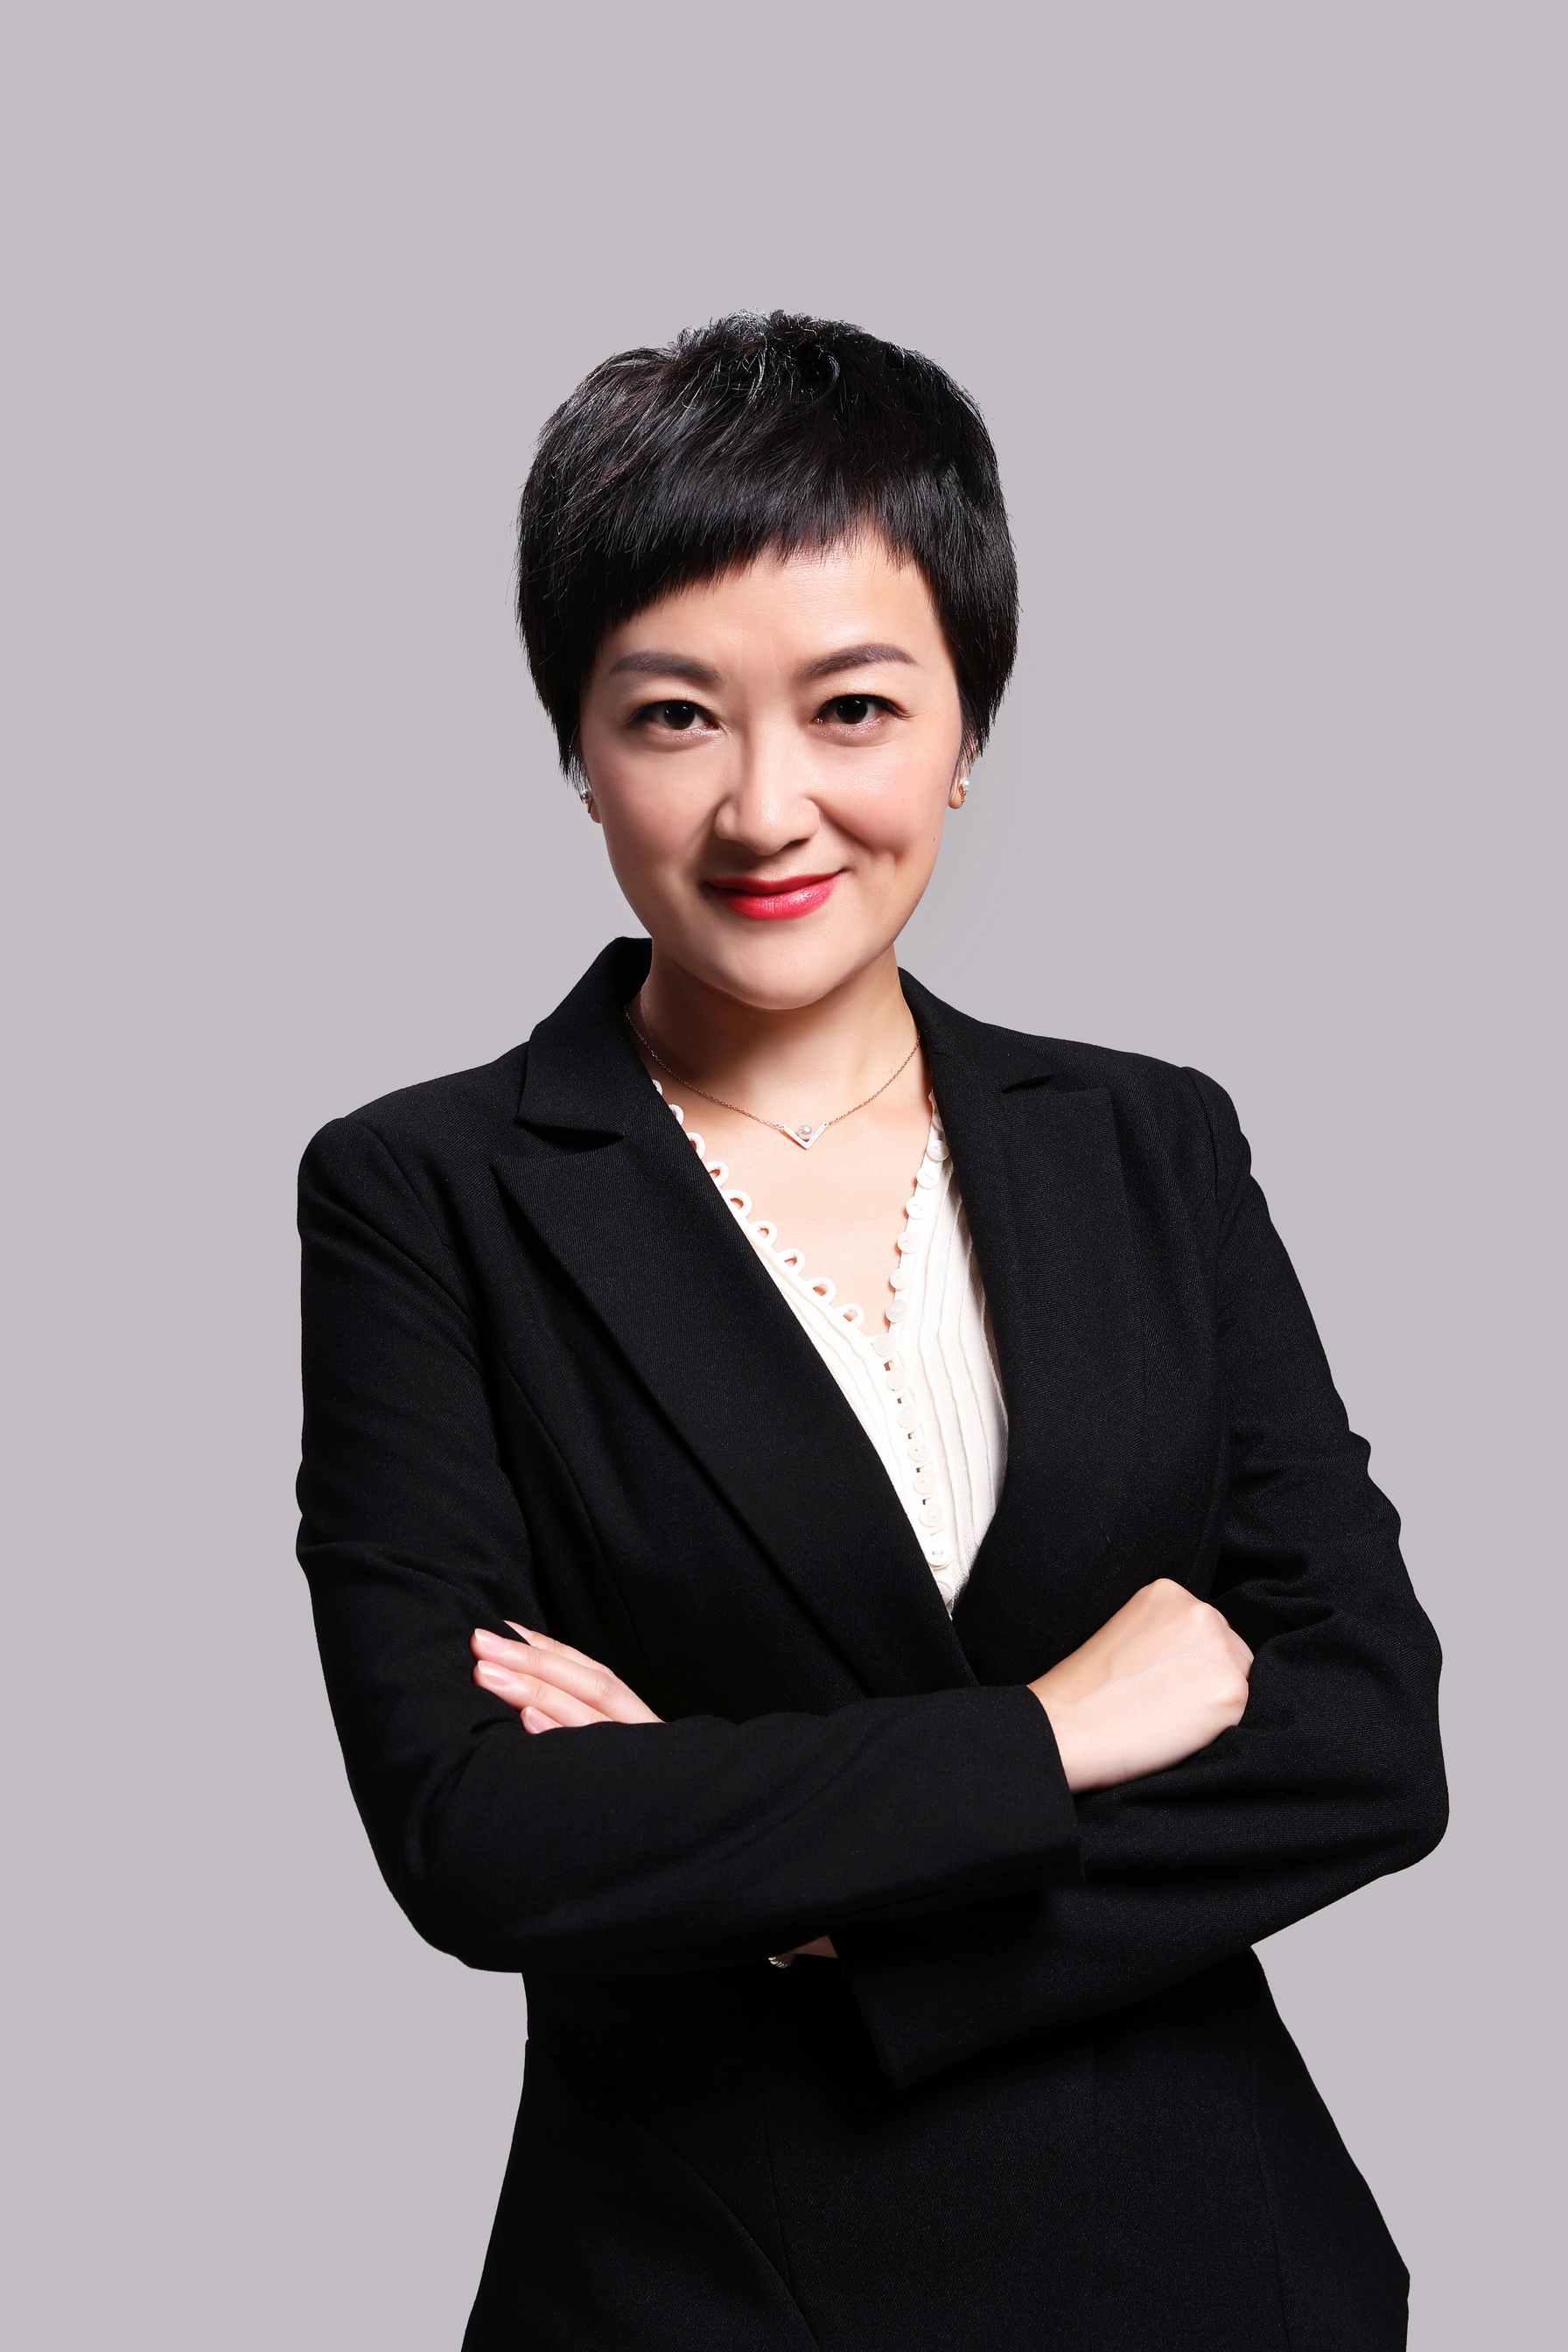 Nancy Han, GM Assistant of BUSS Compounding Solutions in Shanghai, China